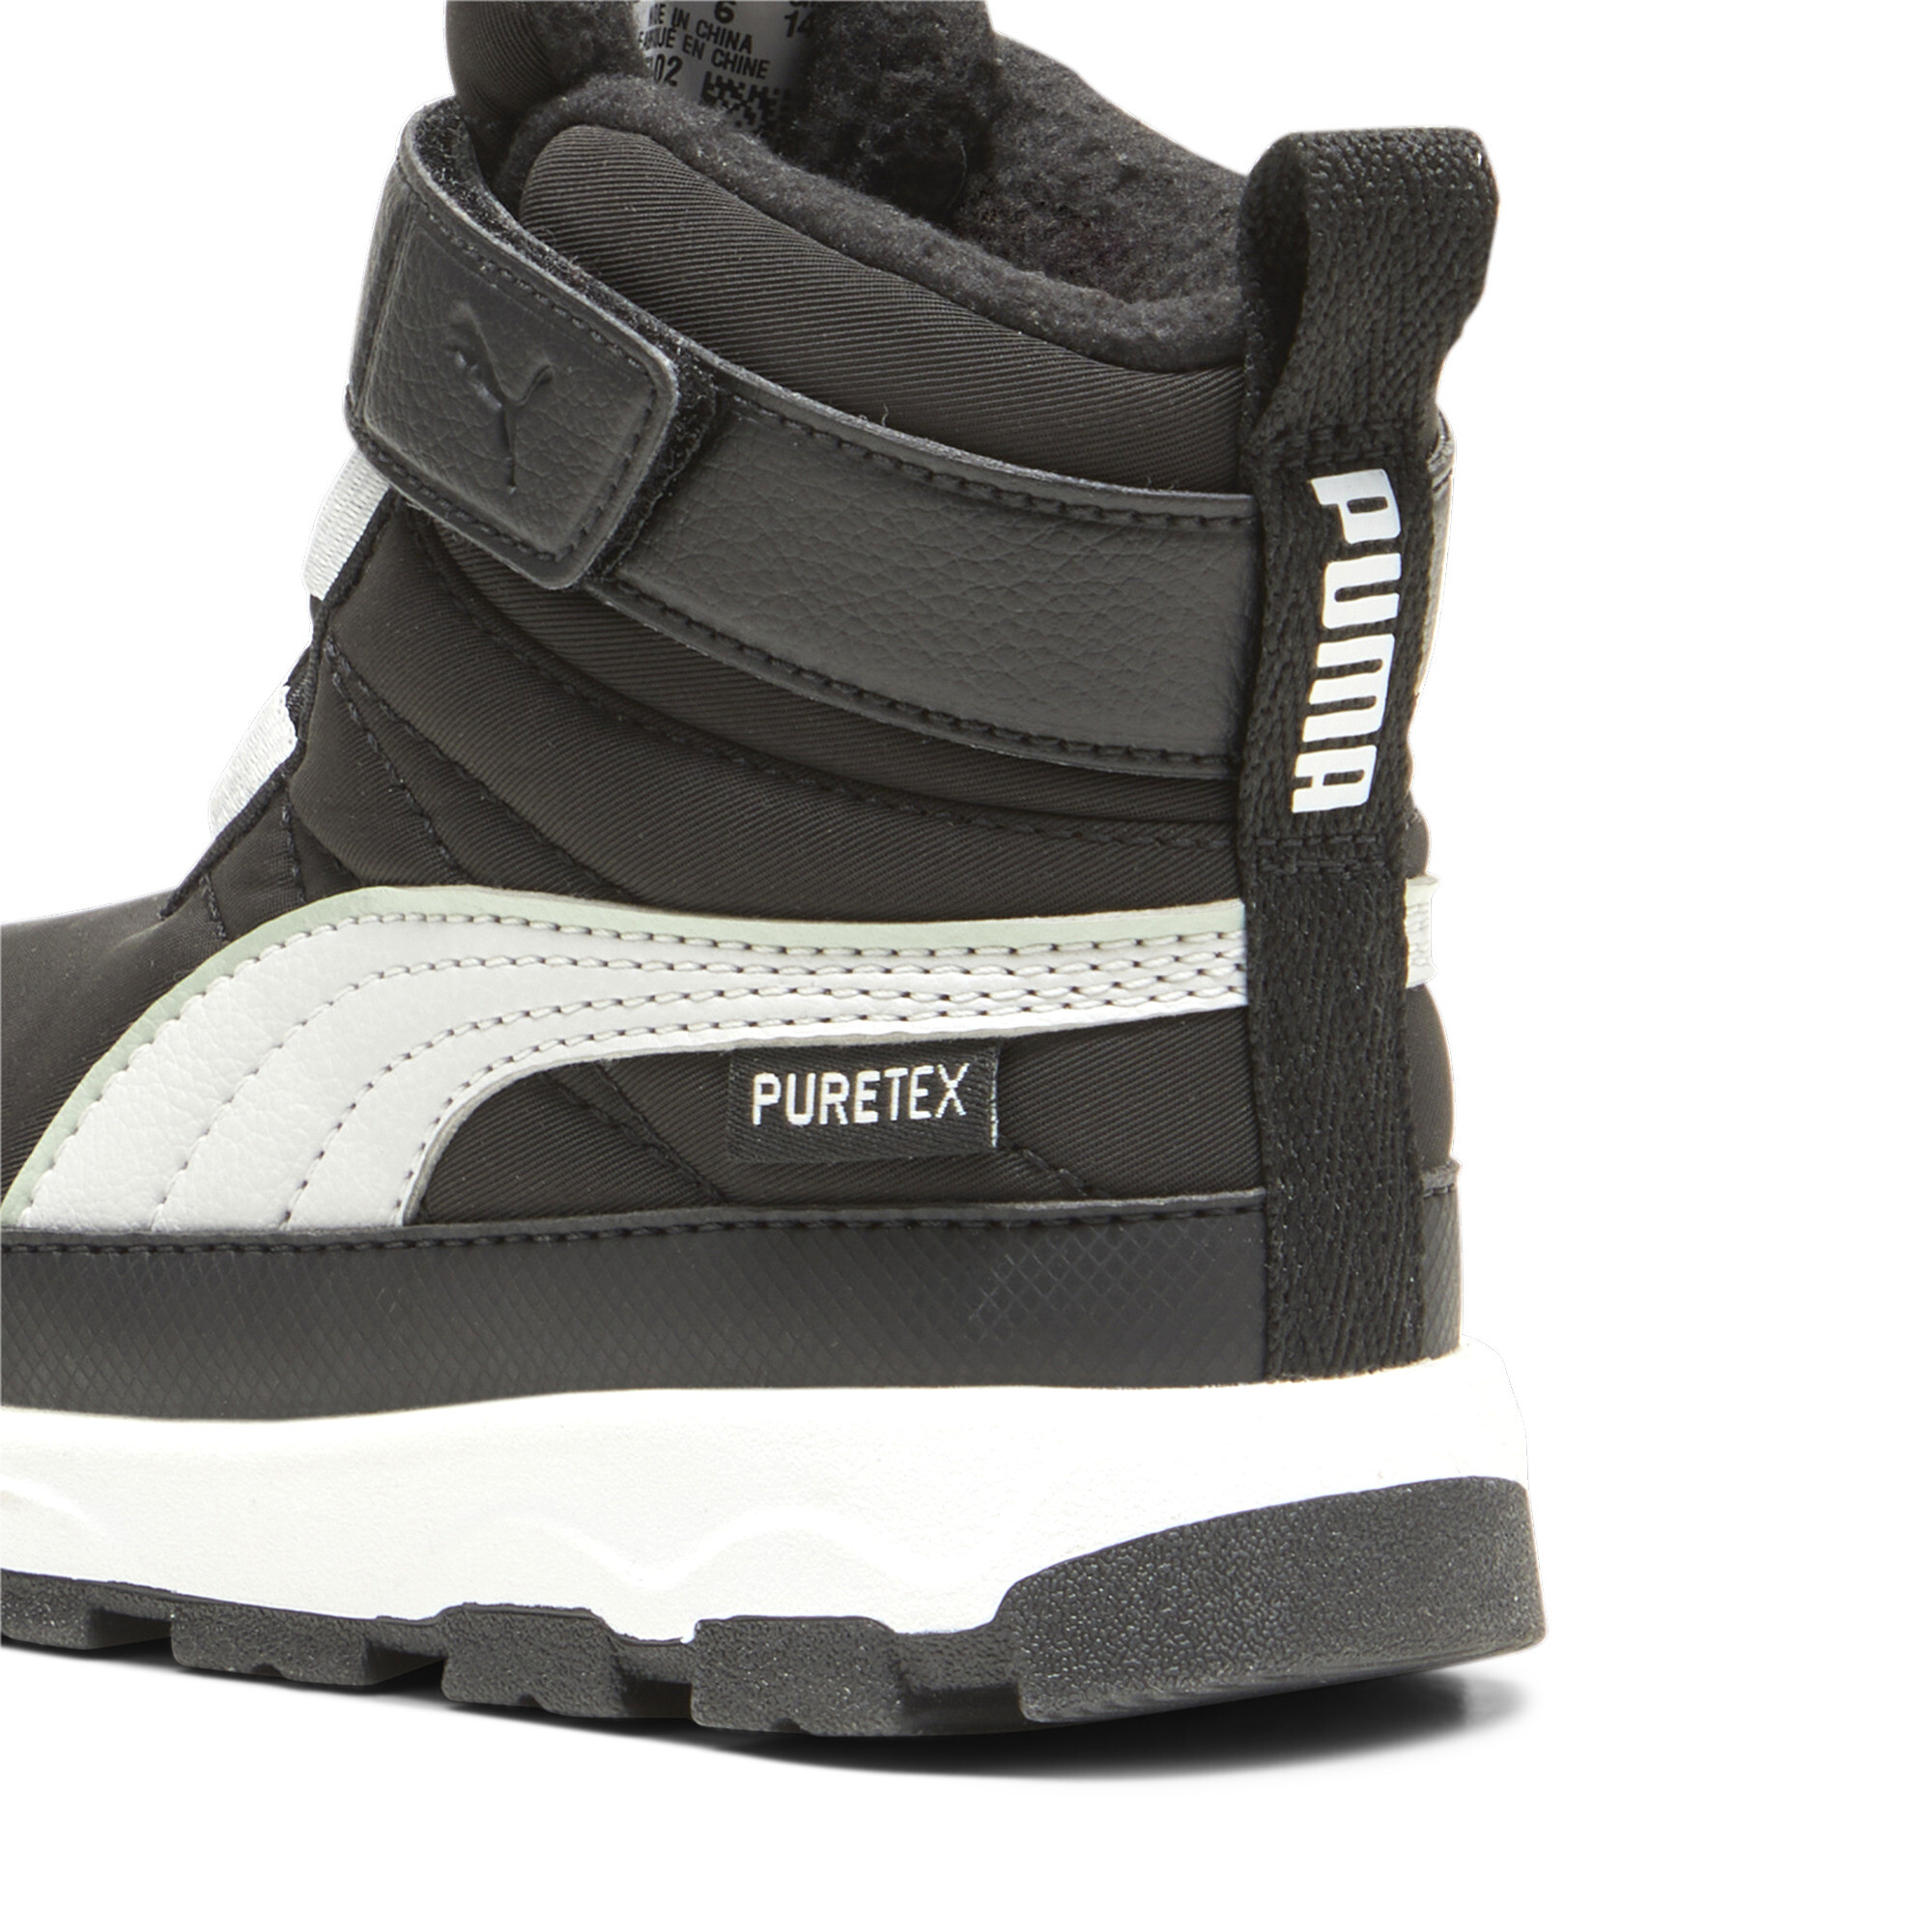 Puma Evolve Toddlers' Boots, Black, Size 22, Shoes